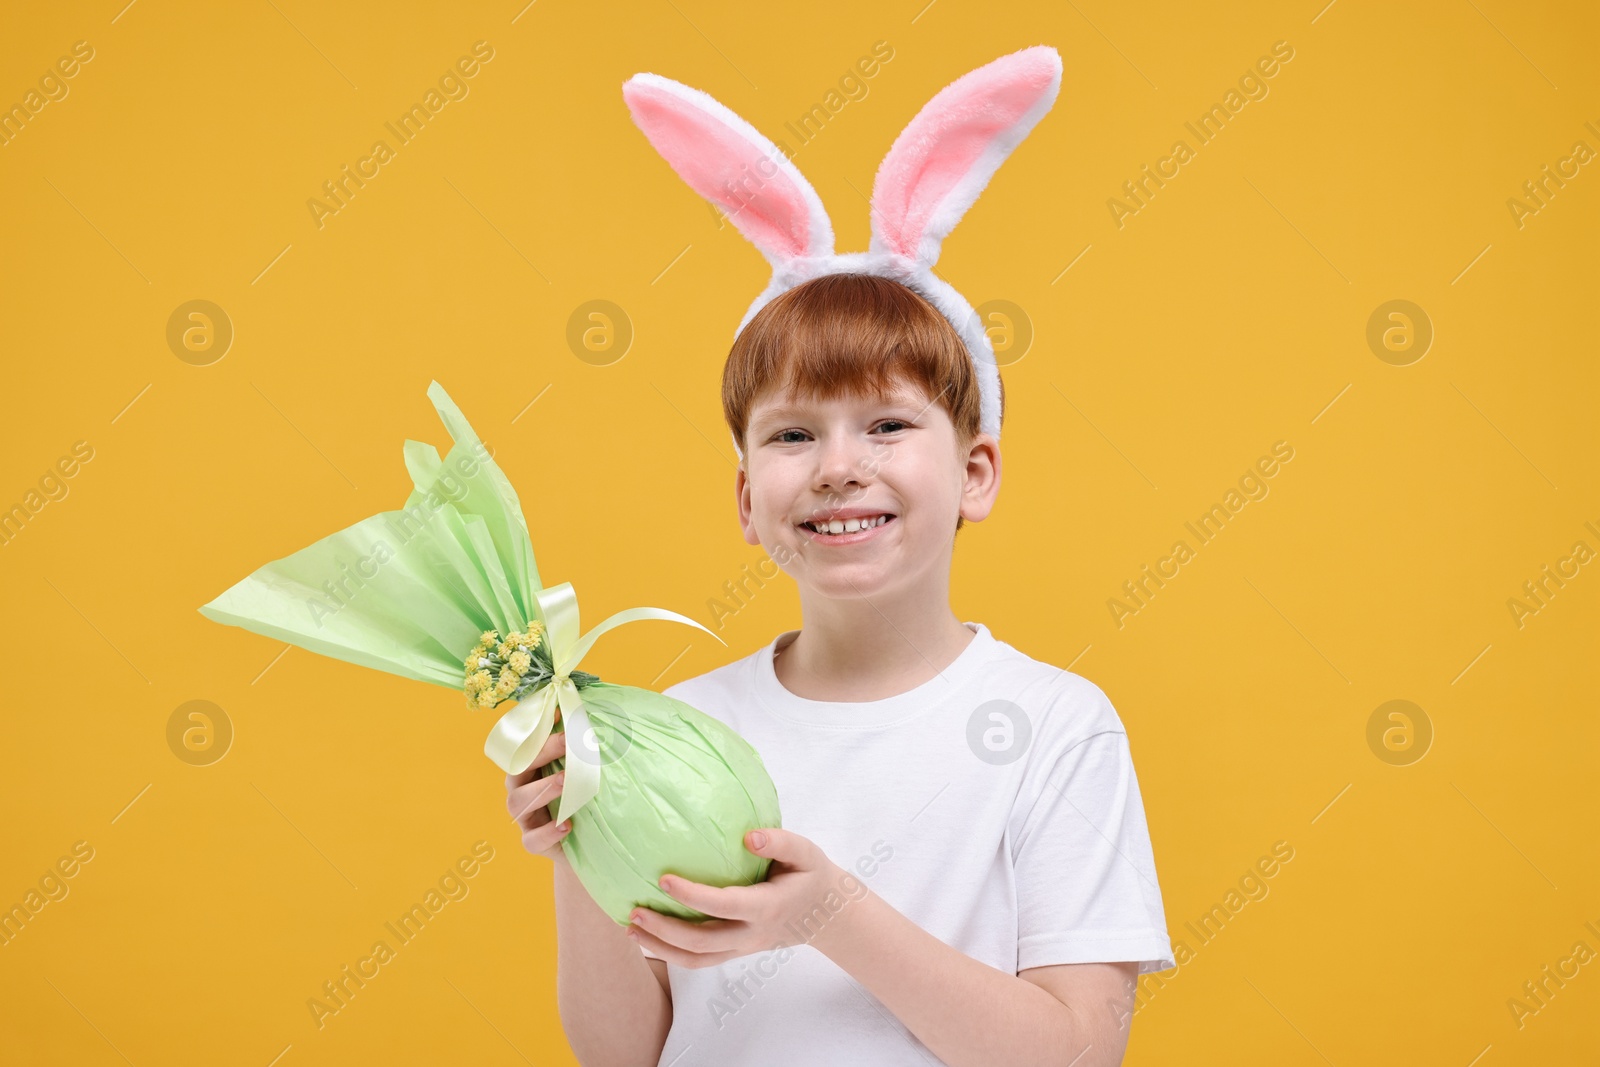 Photo of Easter celebration. Cute little boy with bunny ears and wrapped egg on orange background